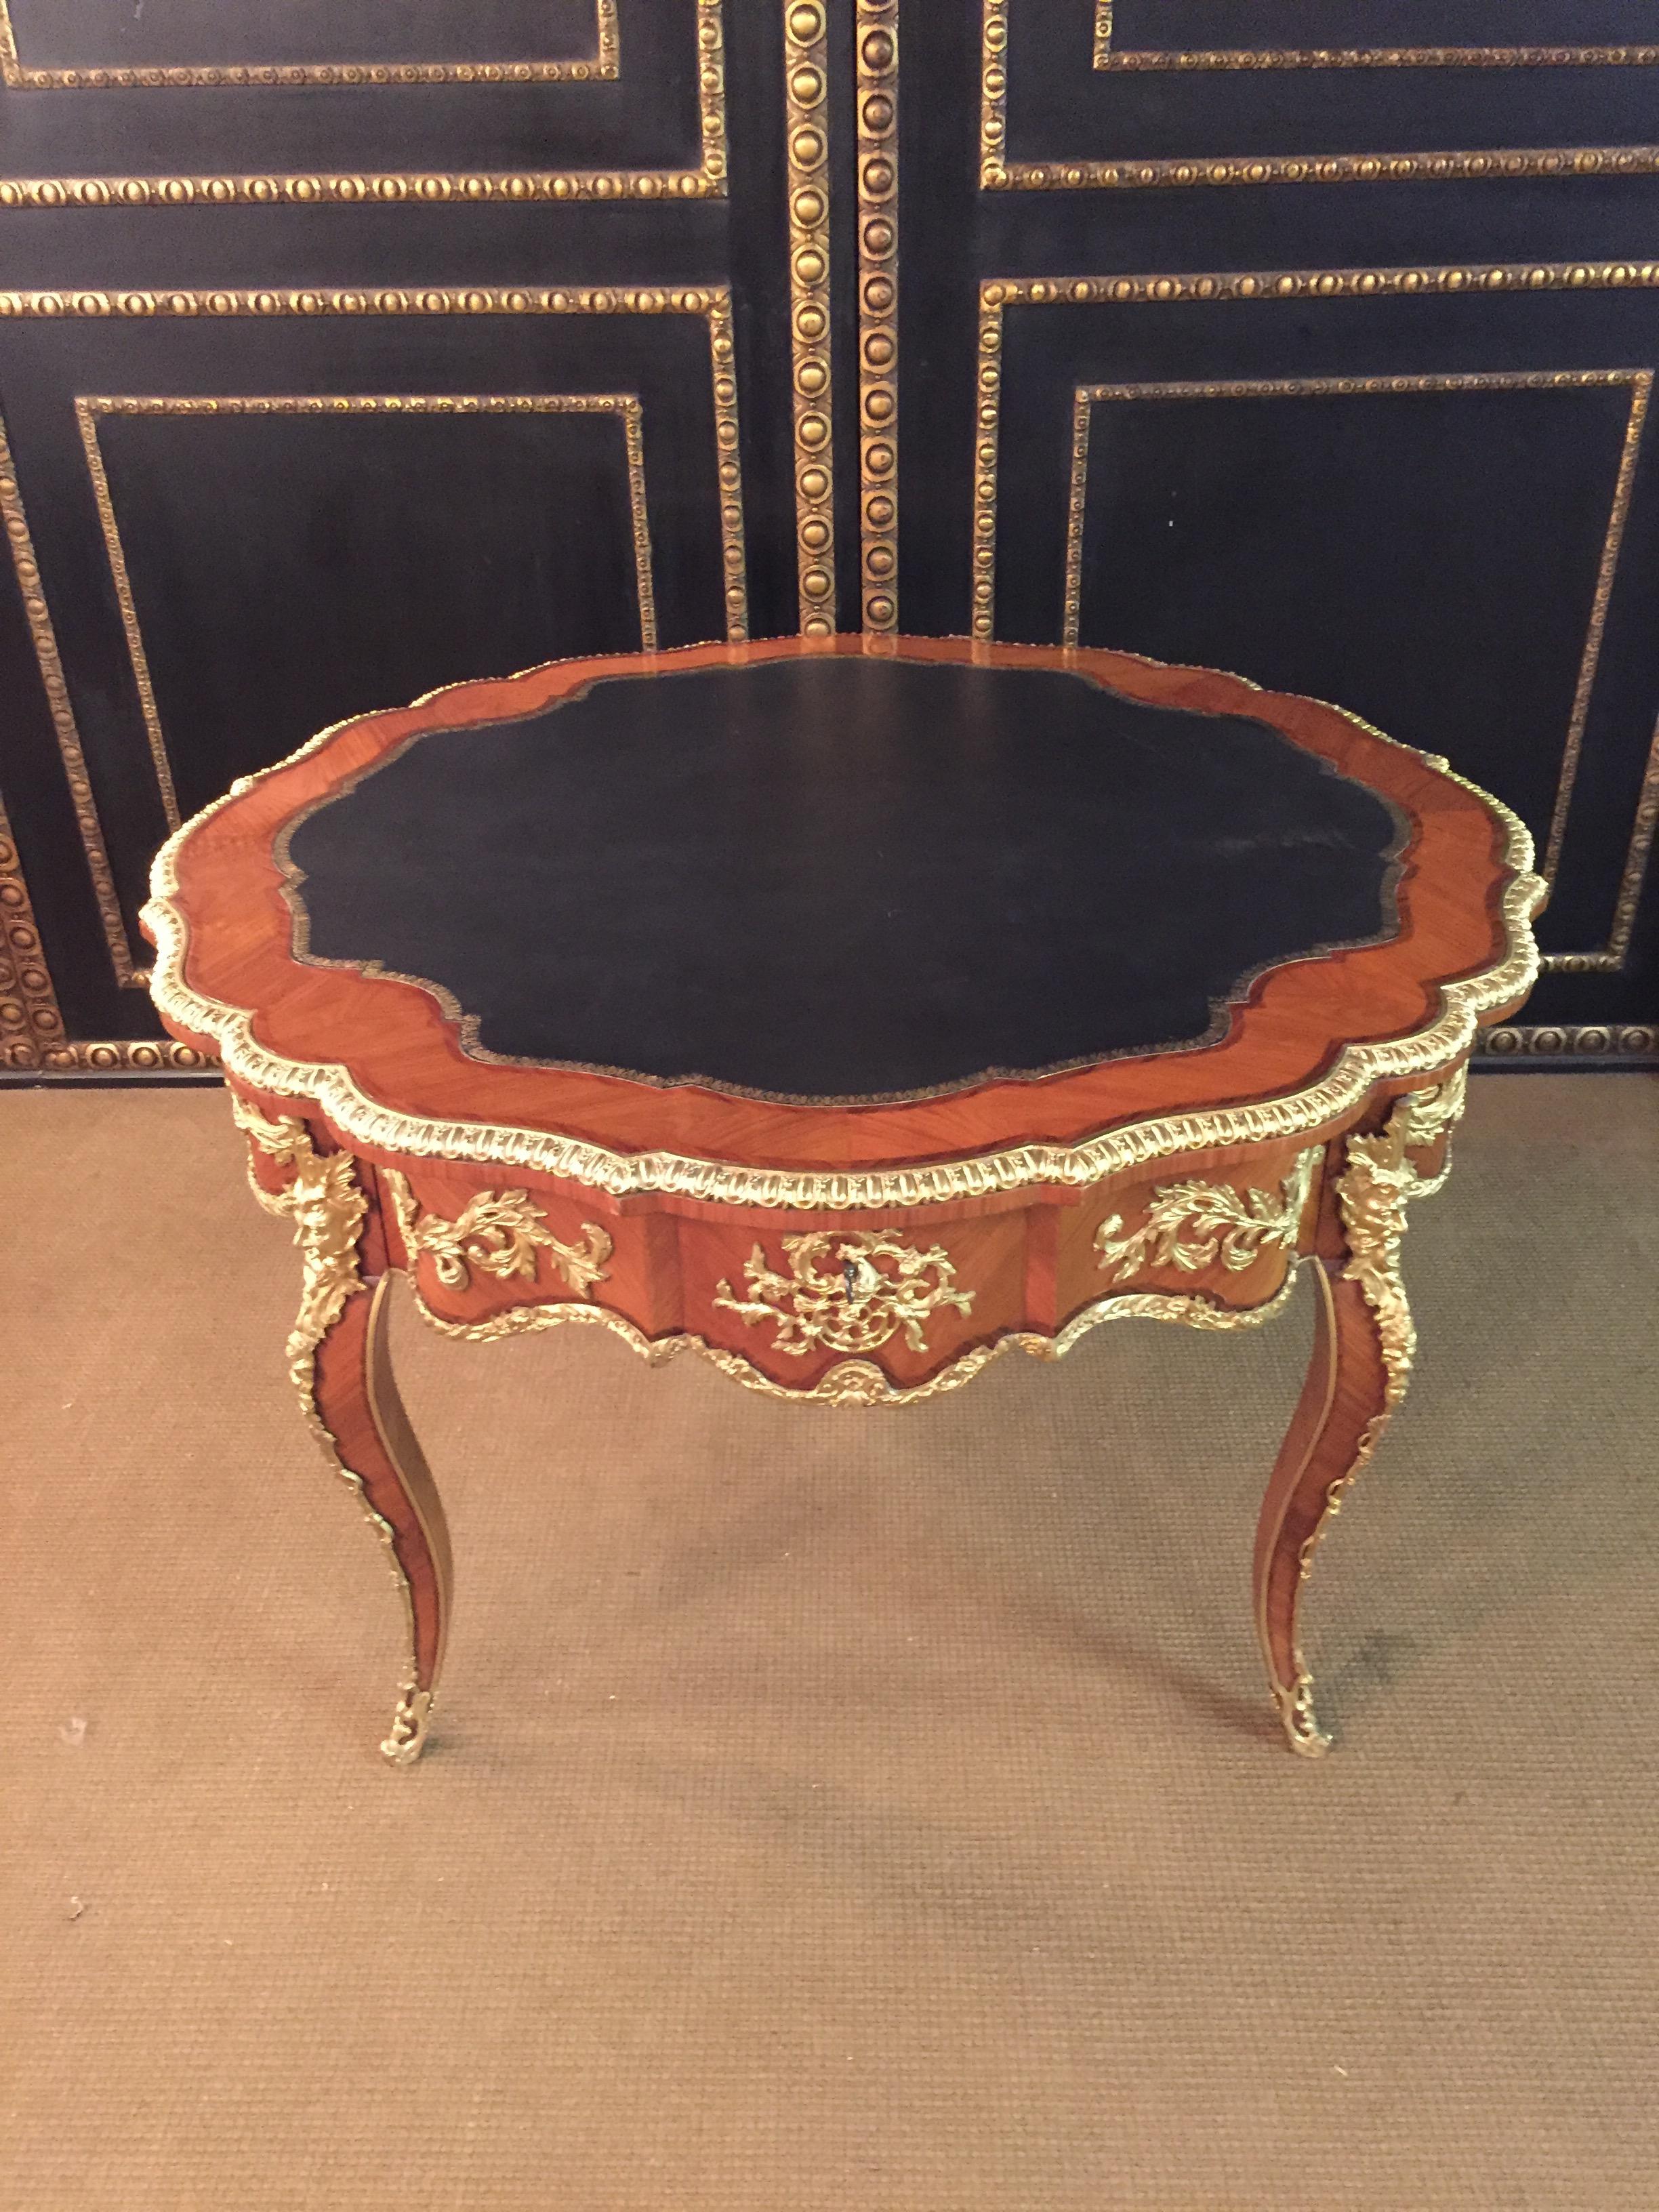 Majestic French salon table in Louis XV style. Polished veneer on solid pinewood. Exceptionally finest engraved, decorative broken rocailles, inlaid with acanthus, and flowered details. On two forward looking imposing bearded devils masks on curved